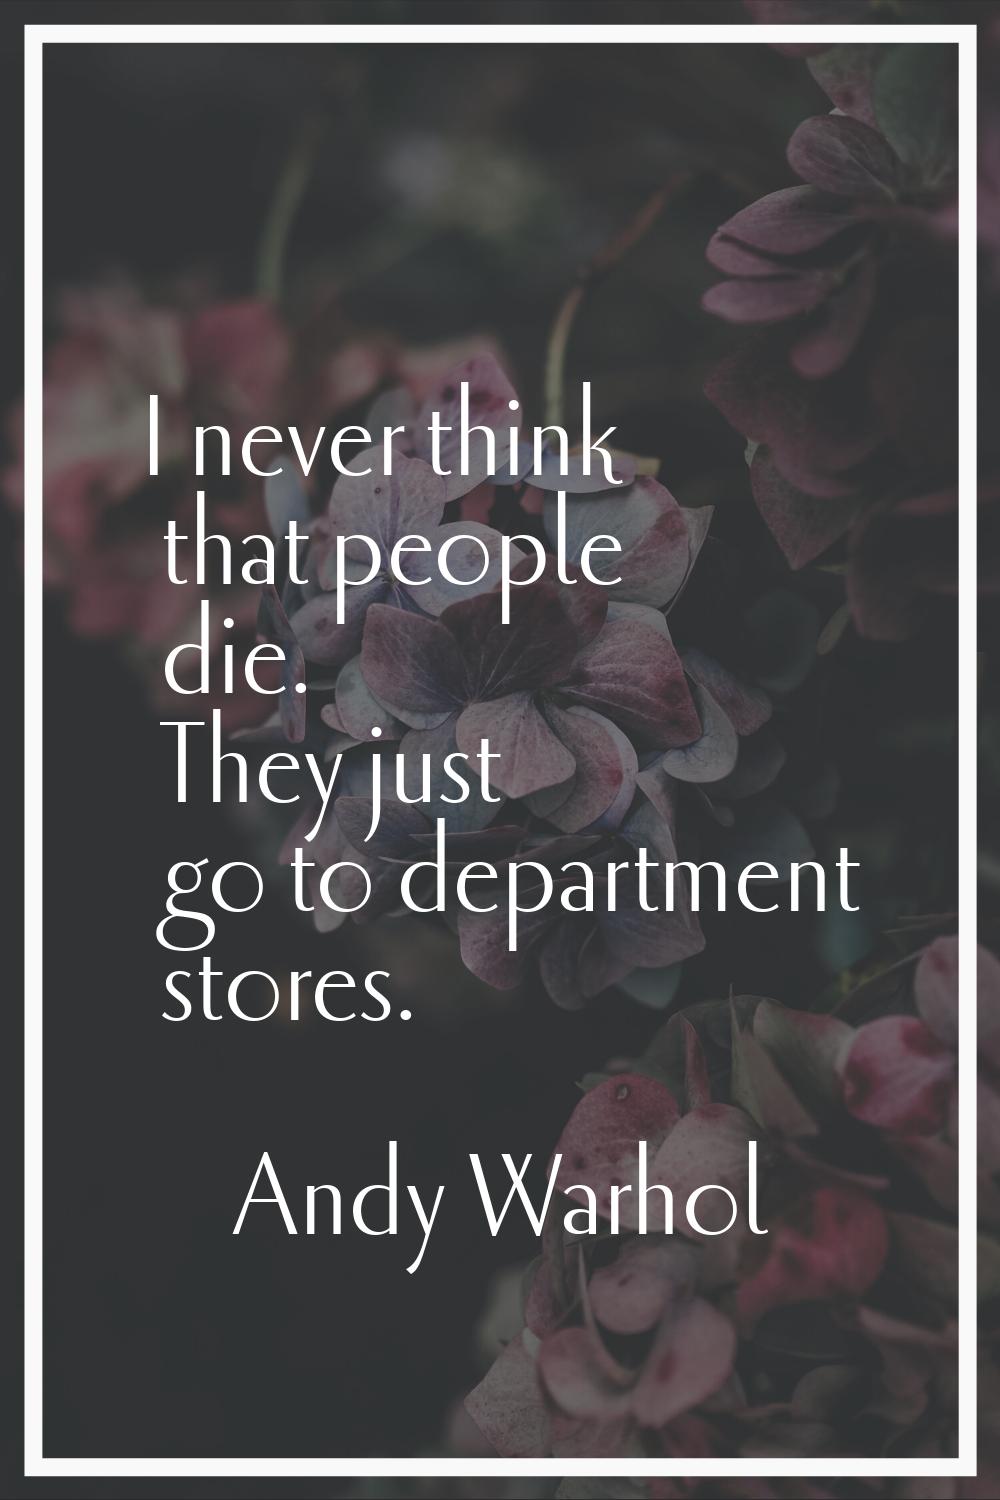 I never think that people die. They just go to department stores.